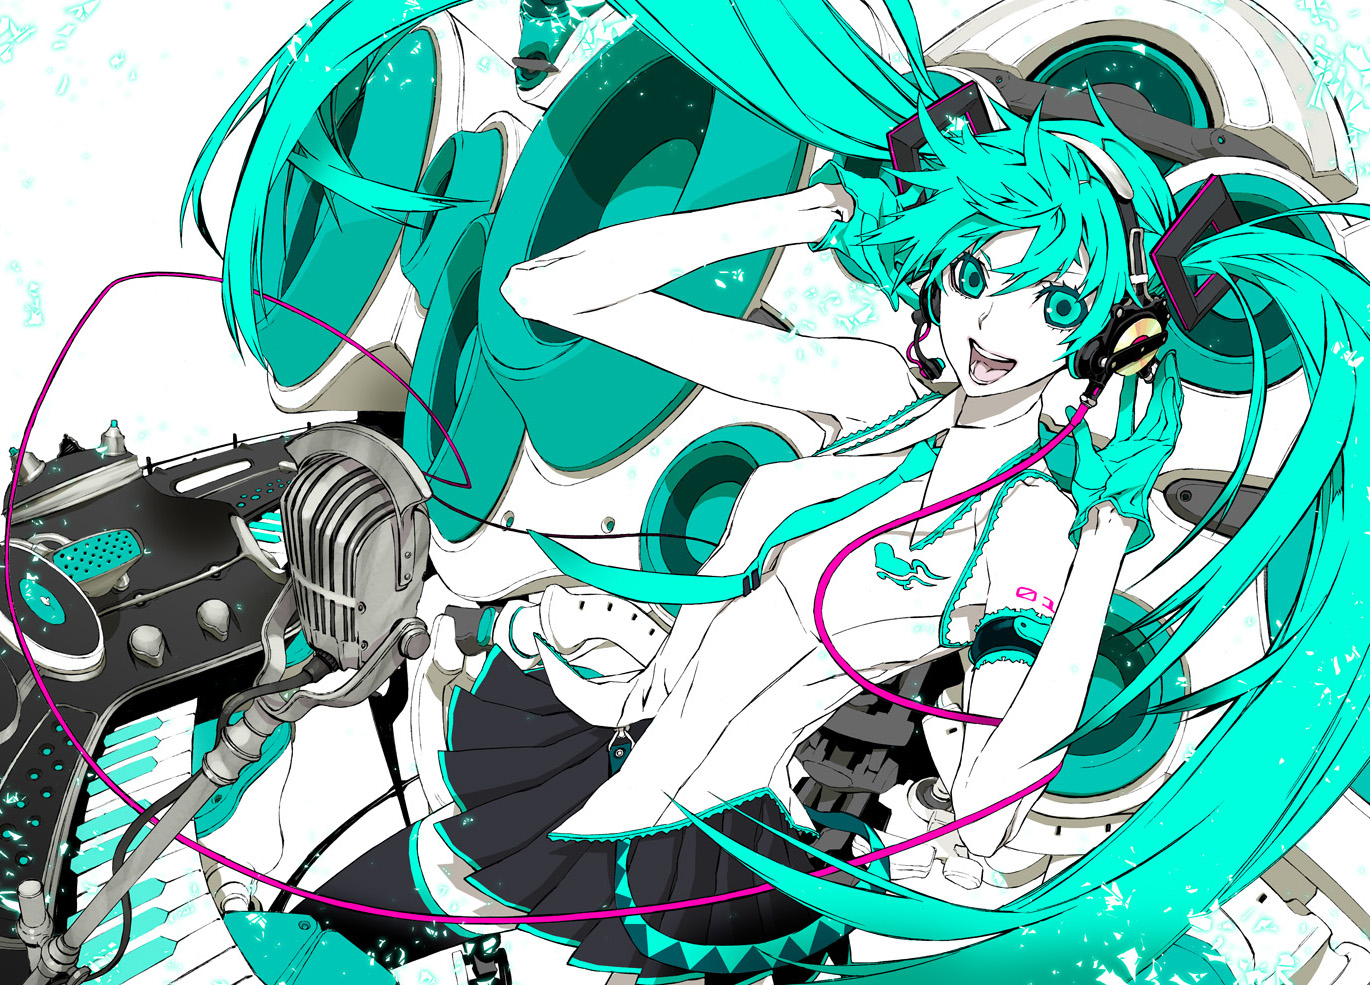 supercell-初音未来supercell